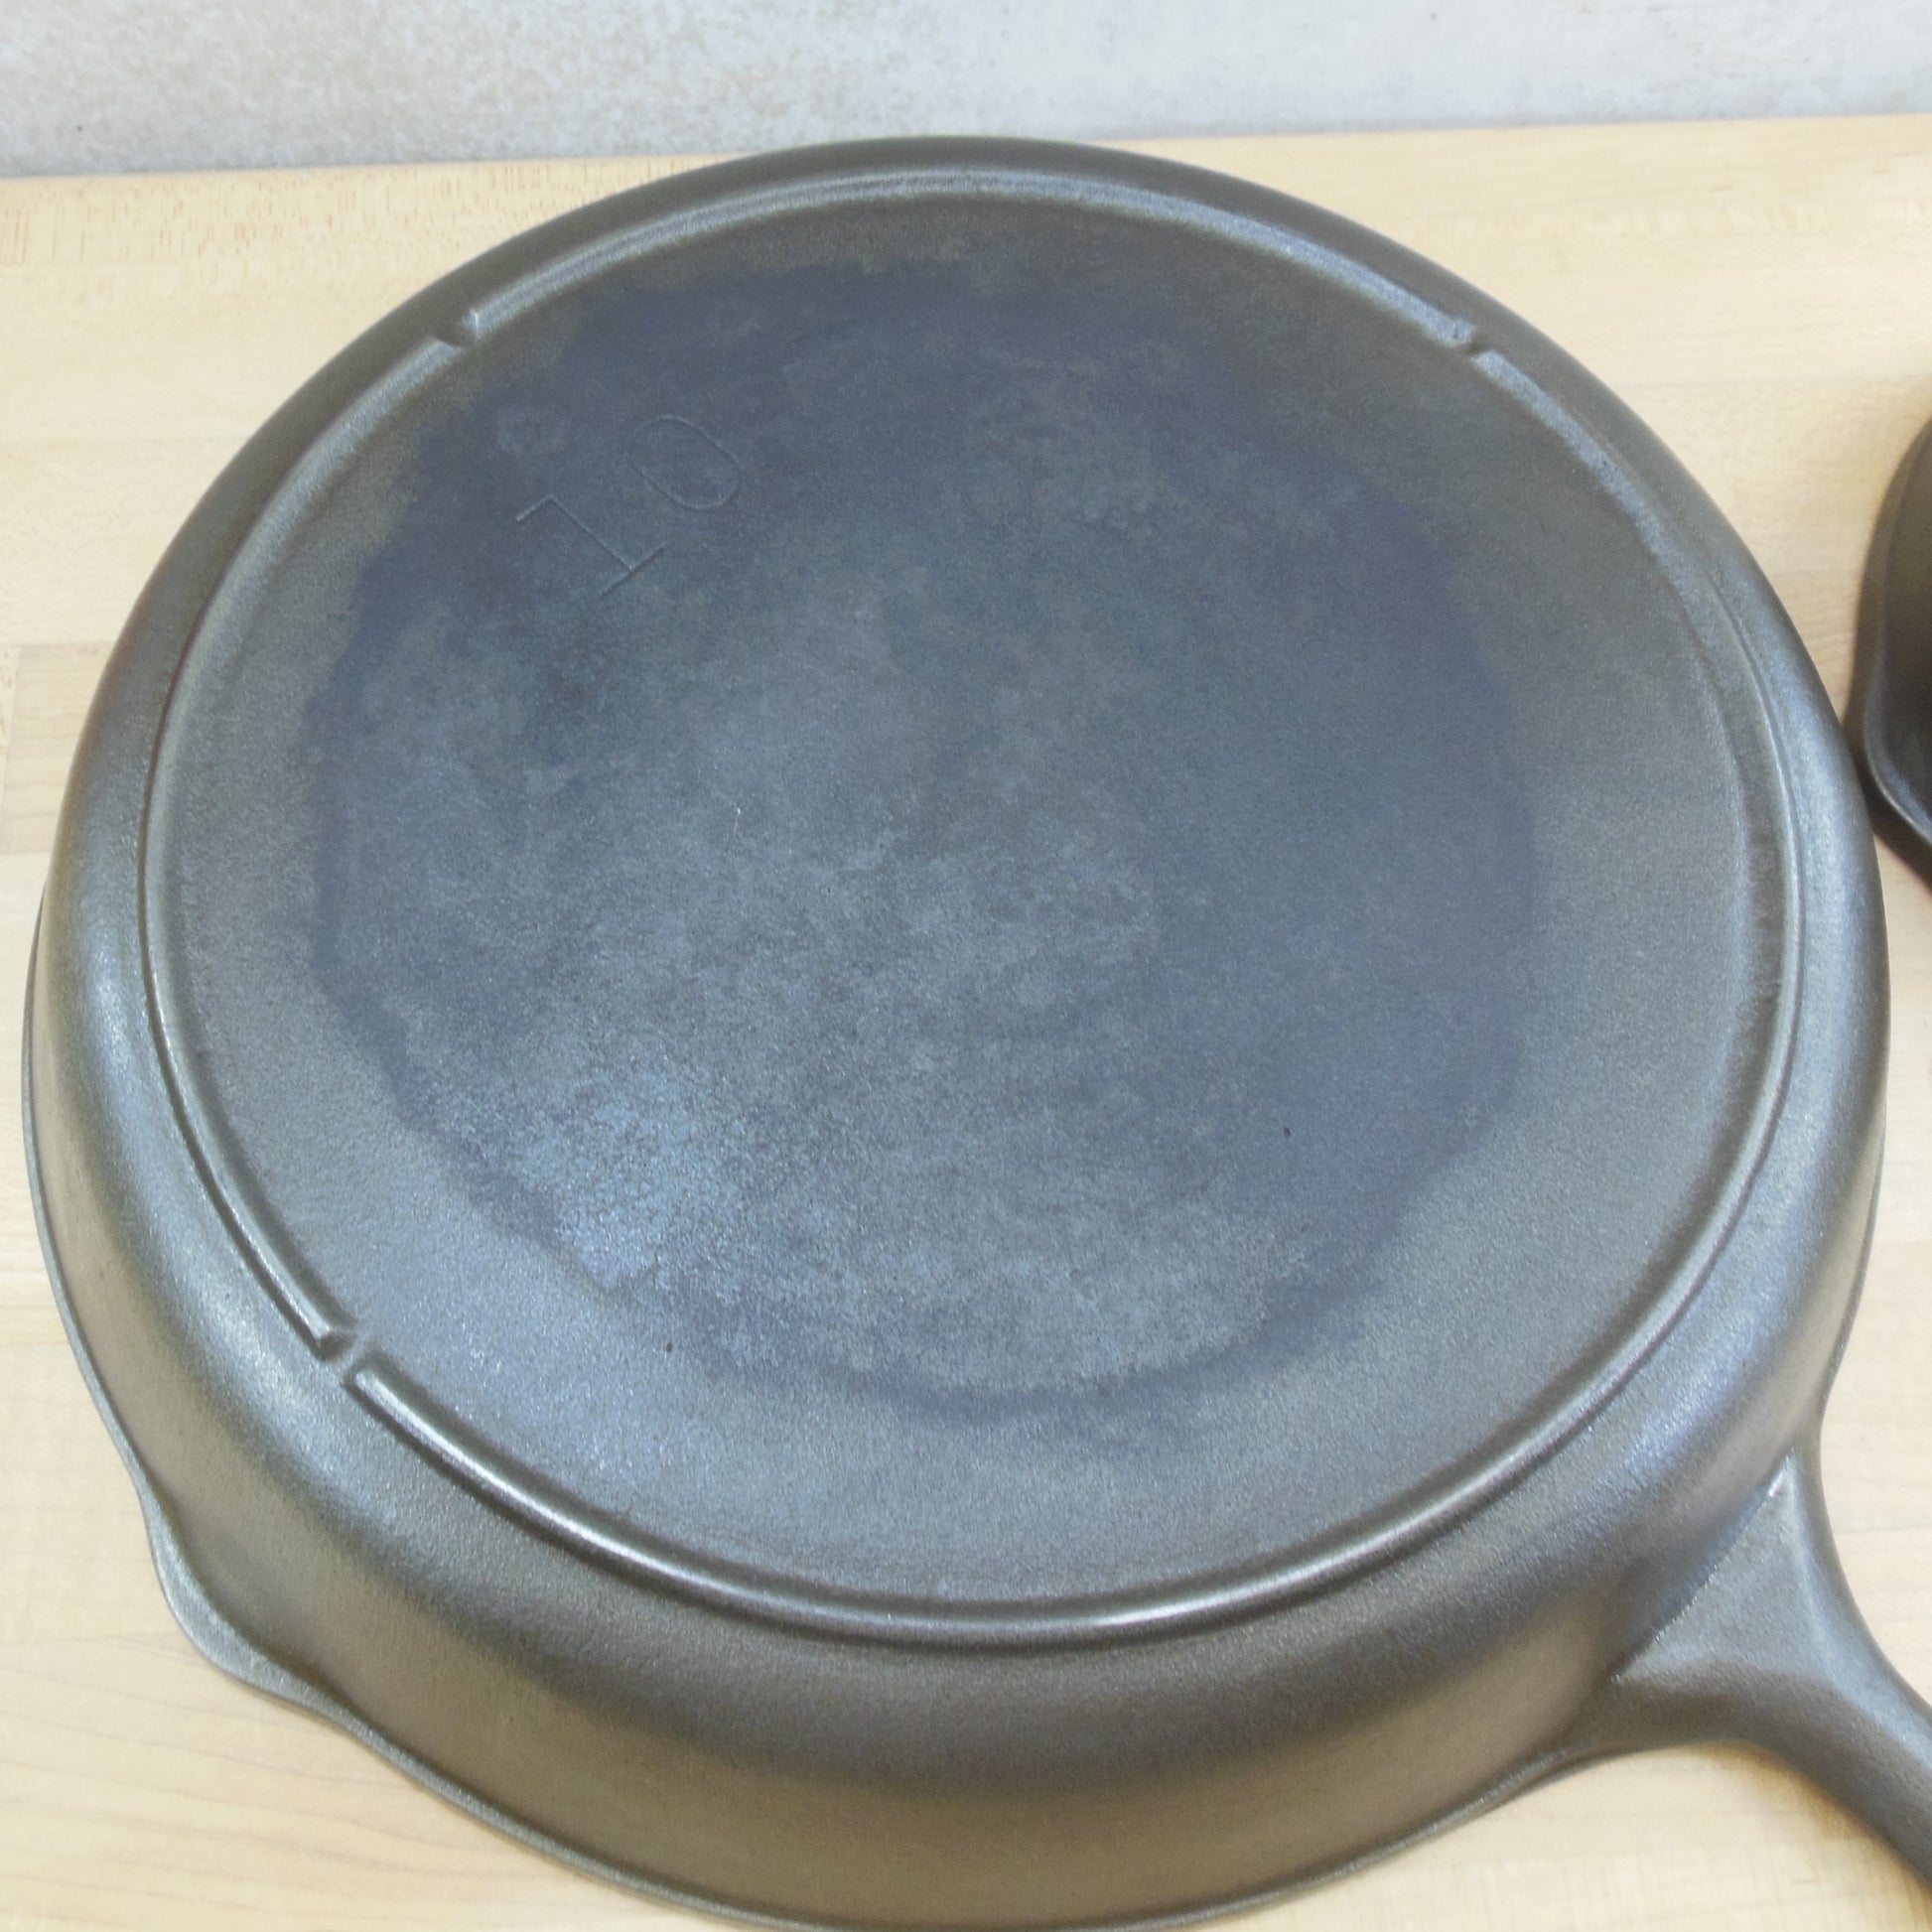 Lodge 10 SK, 3-notch Heat Ring, Cast Iron Skillet. Made in the USA.  Manufactured by Lodge in the 1970's. Excellent Condition 